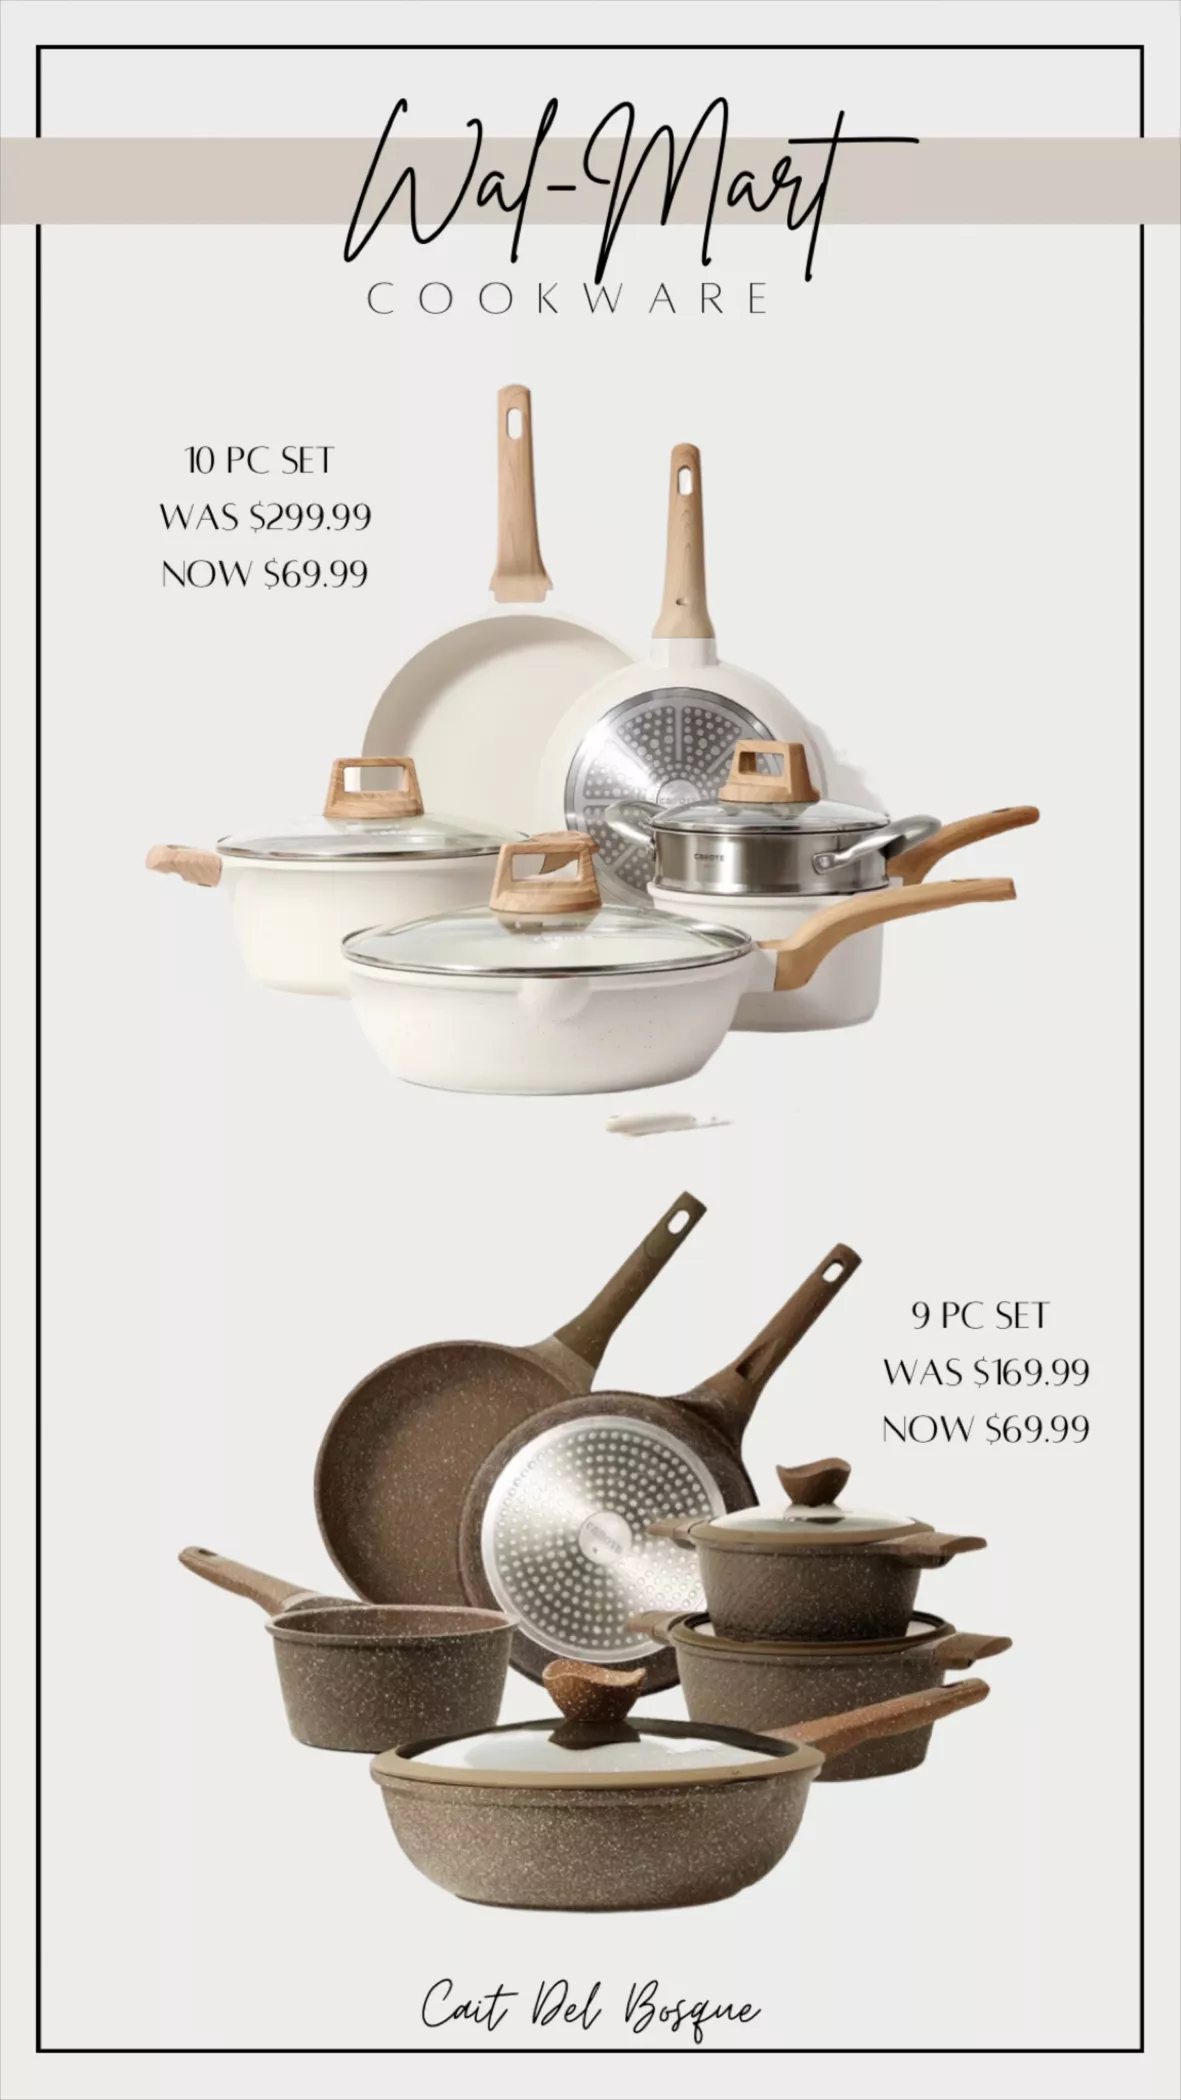 8-Piece Carote Essentials Nonstick Pots and Pans Set only $69.99